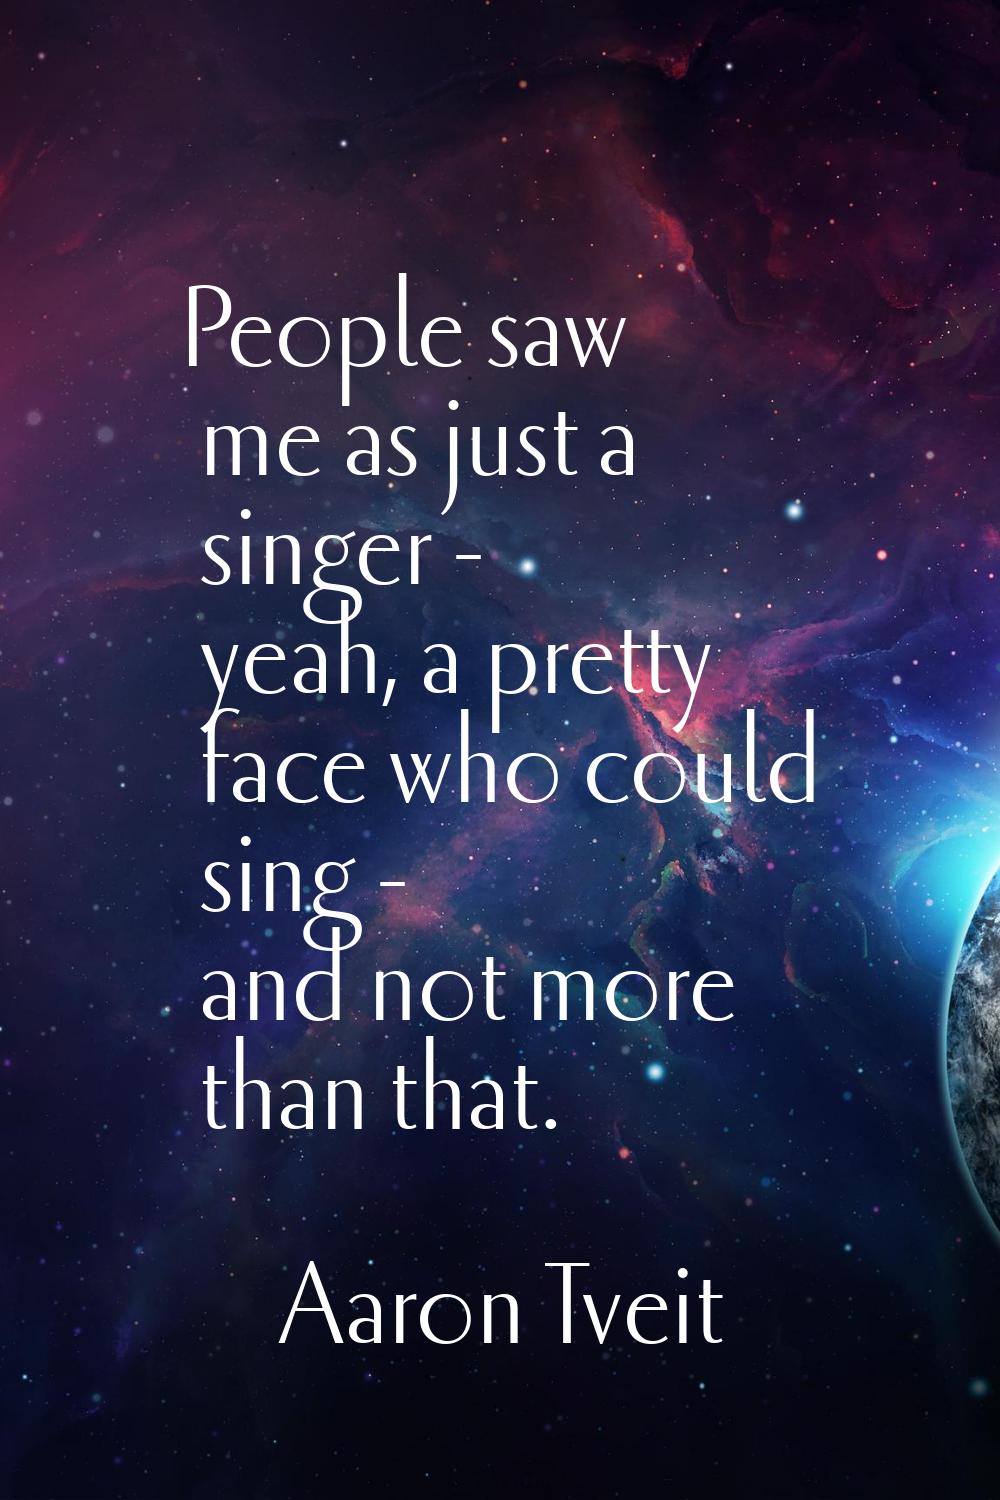 People saw me as just a singer - yeah, a pretty face who could sing - and not more than that.